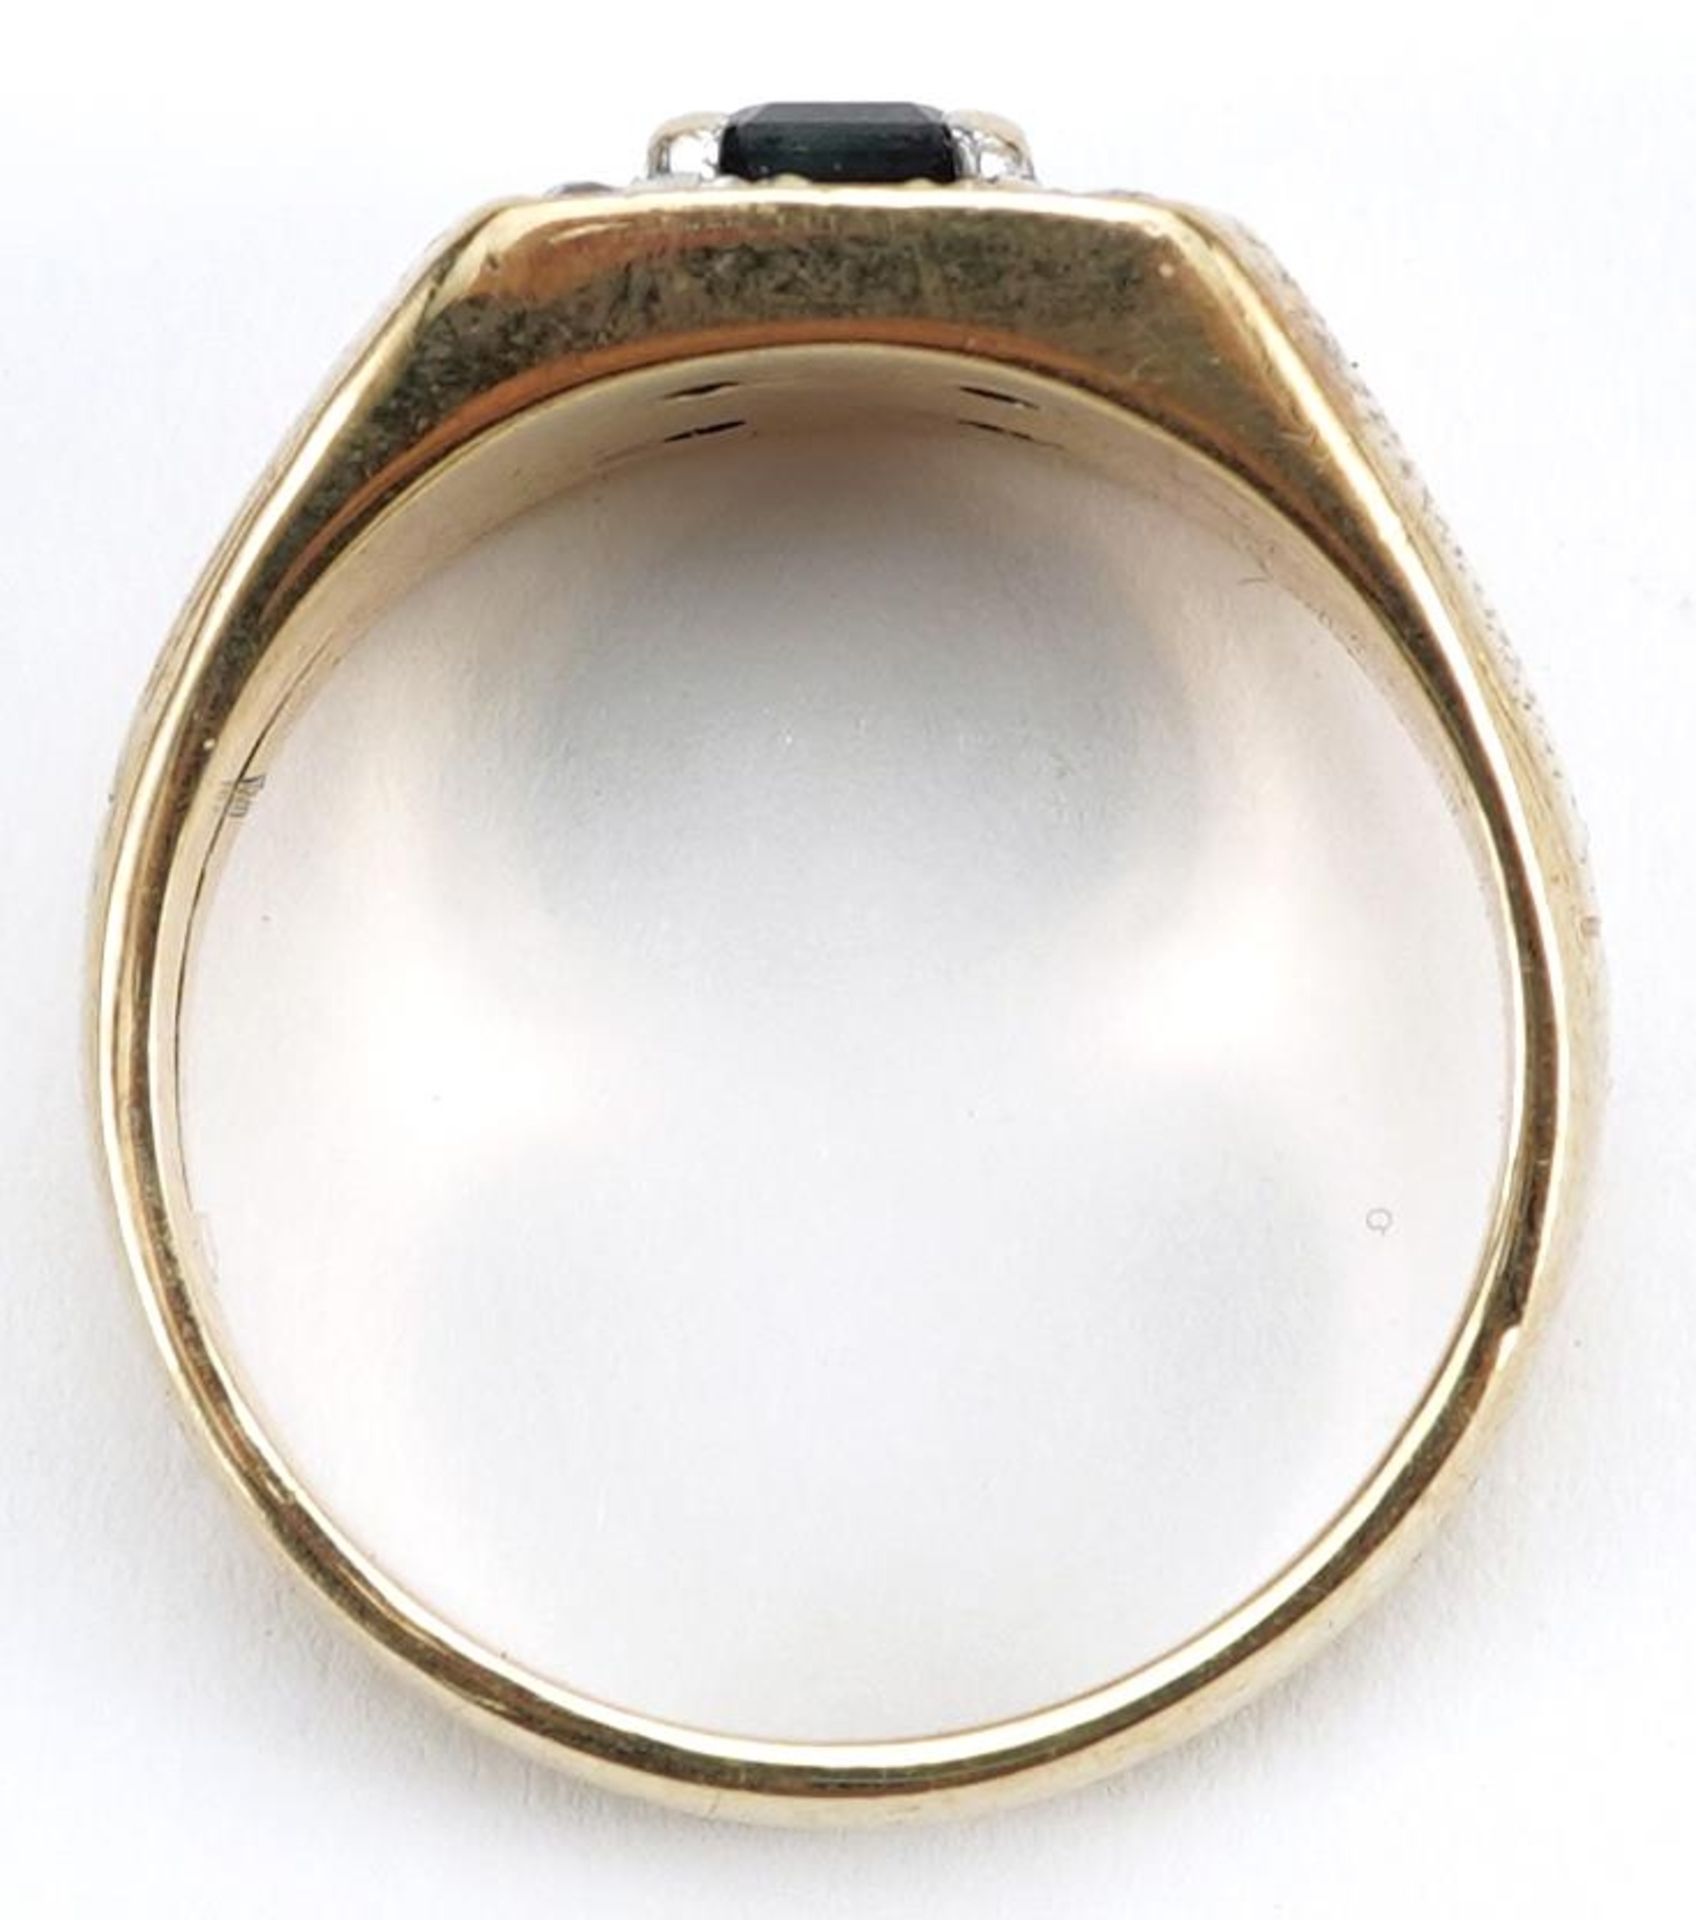 Heavy unmarked gold sapphire and diamond ring with engraved shoulders, tests as 9ct gold, the - Image 3 of 3